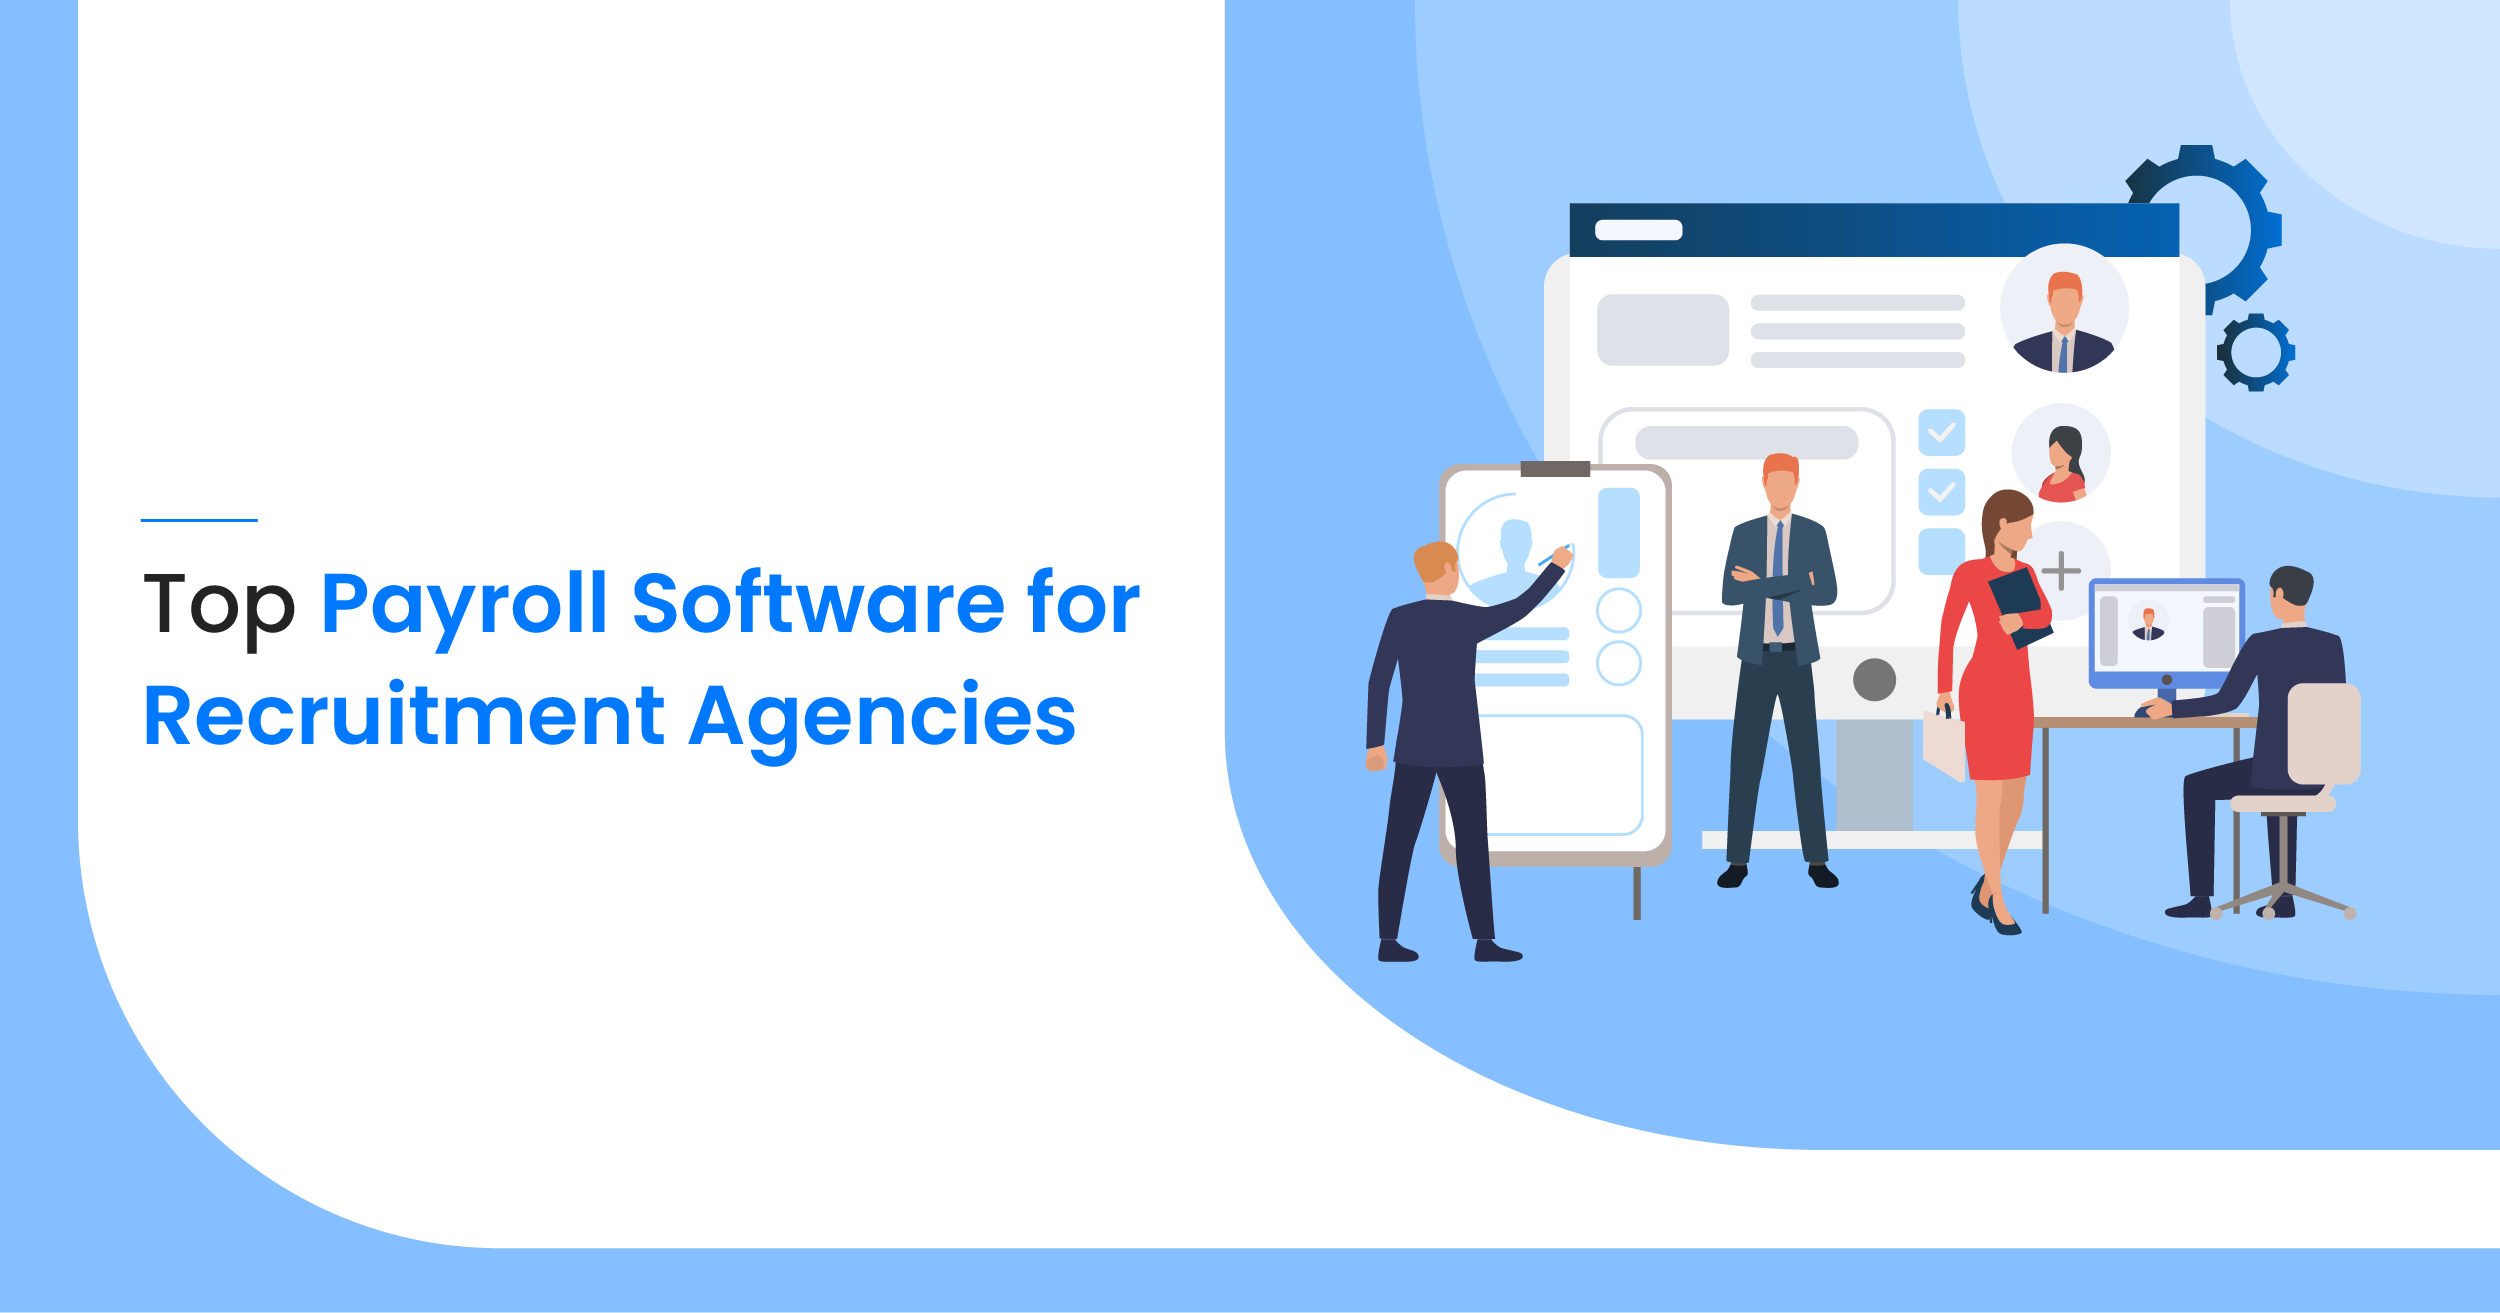 Top 6 Payroll Software for Recruitment Agencies in 2020